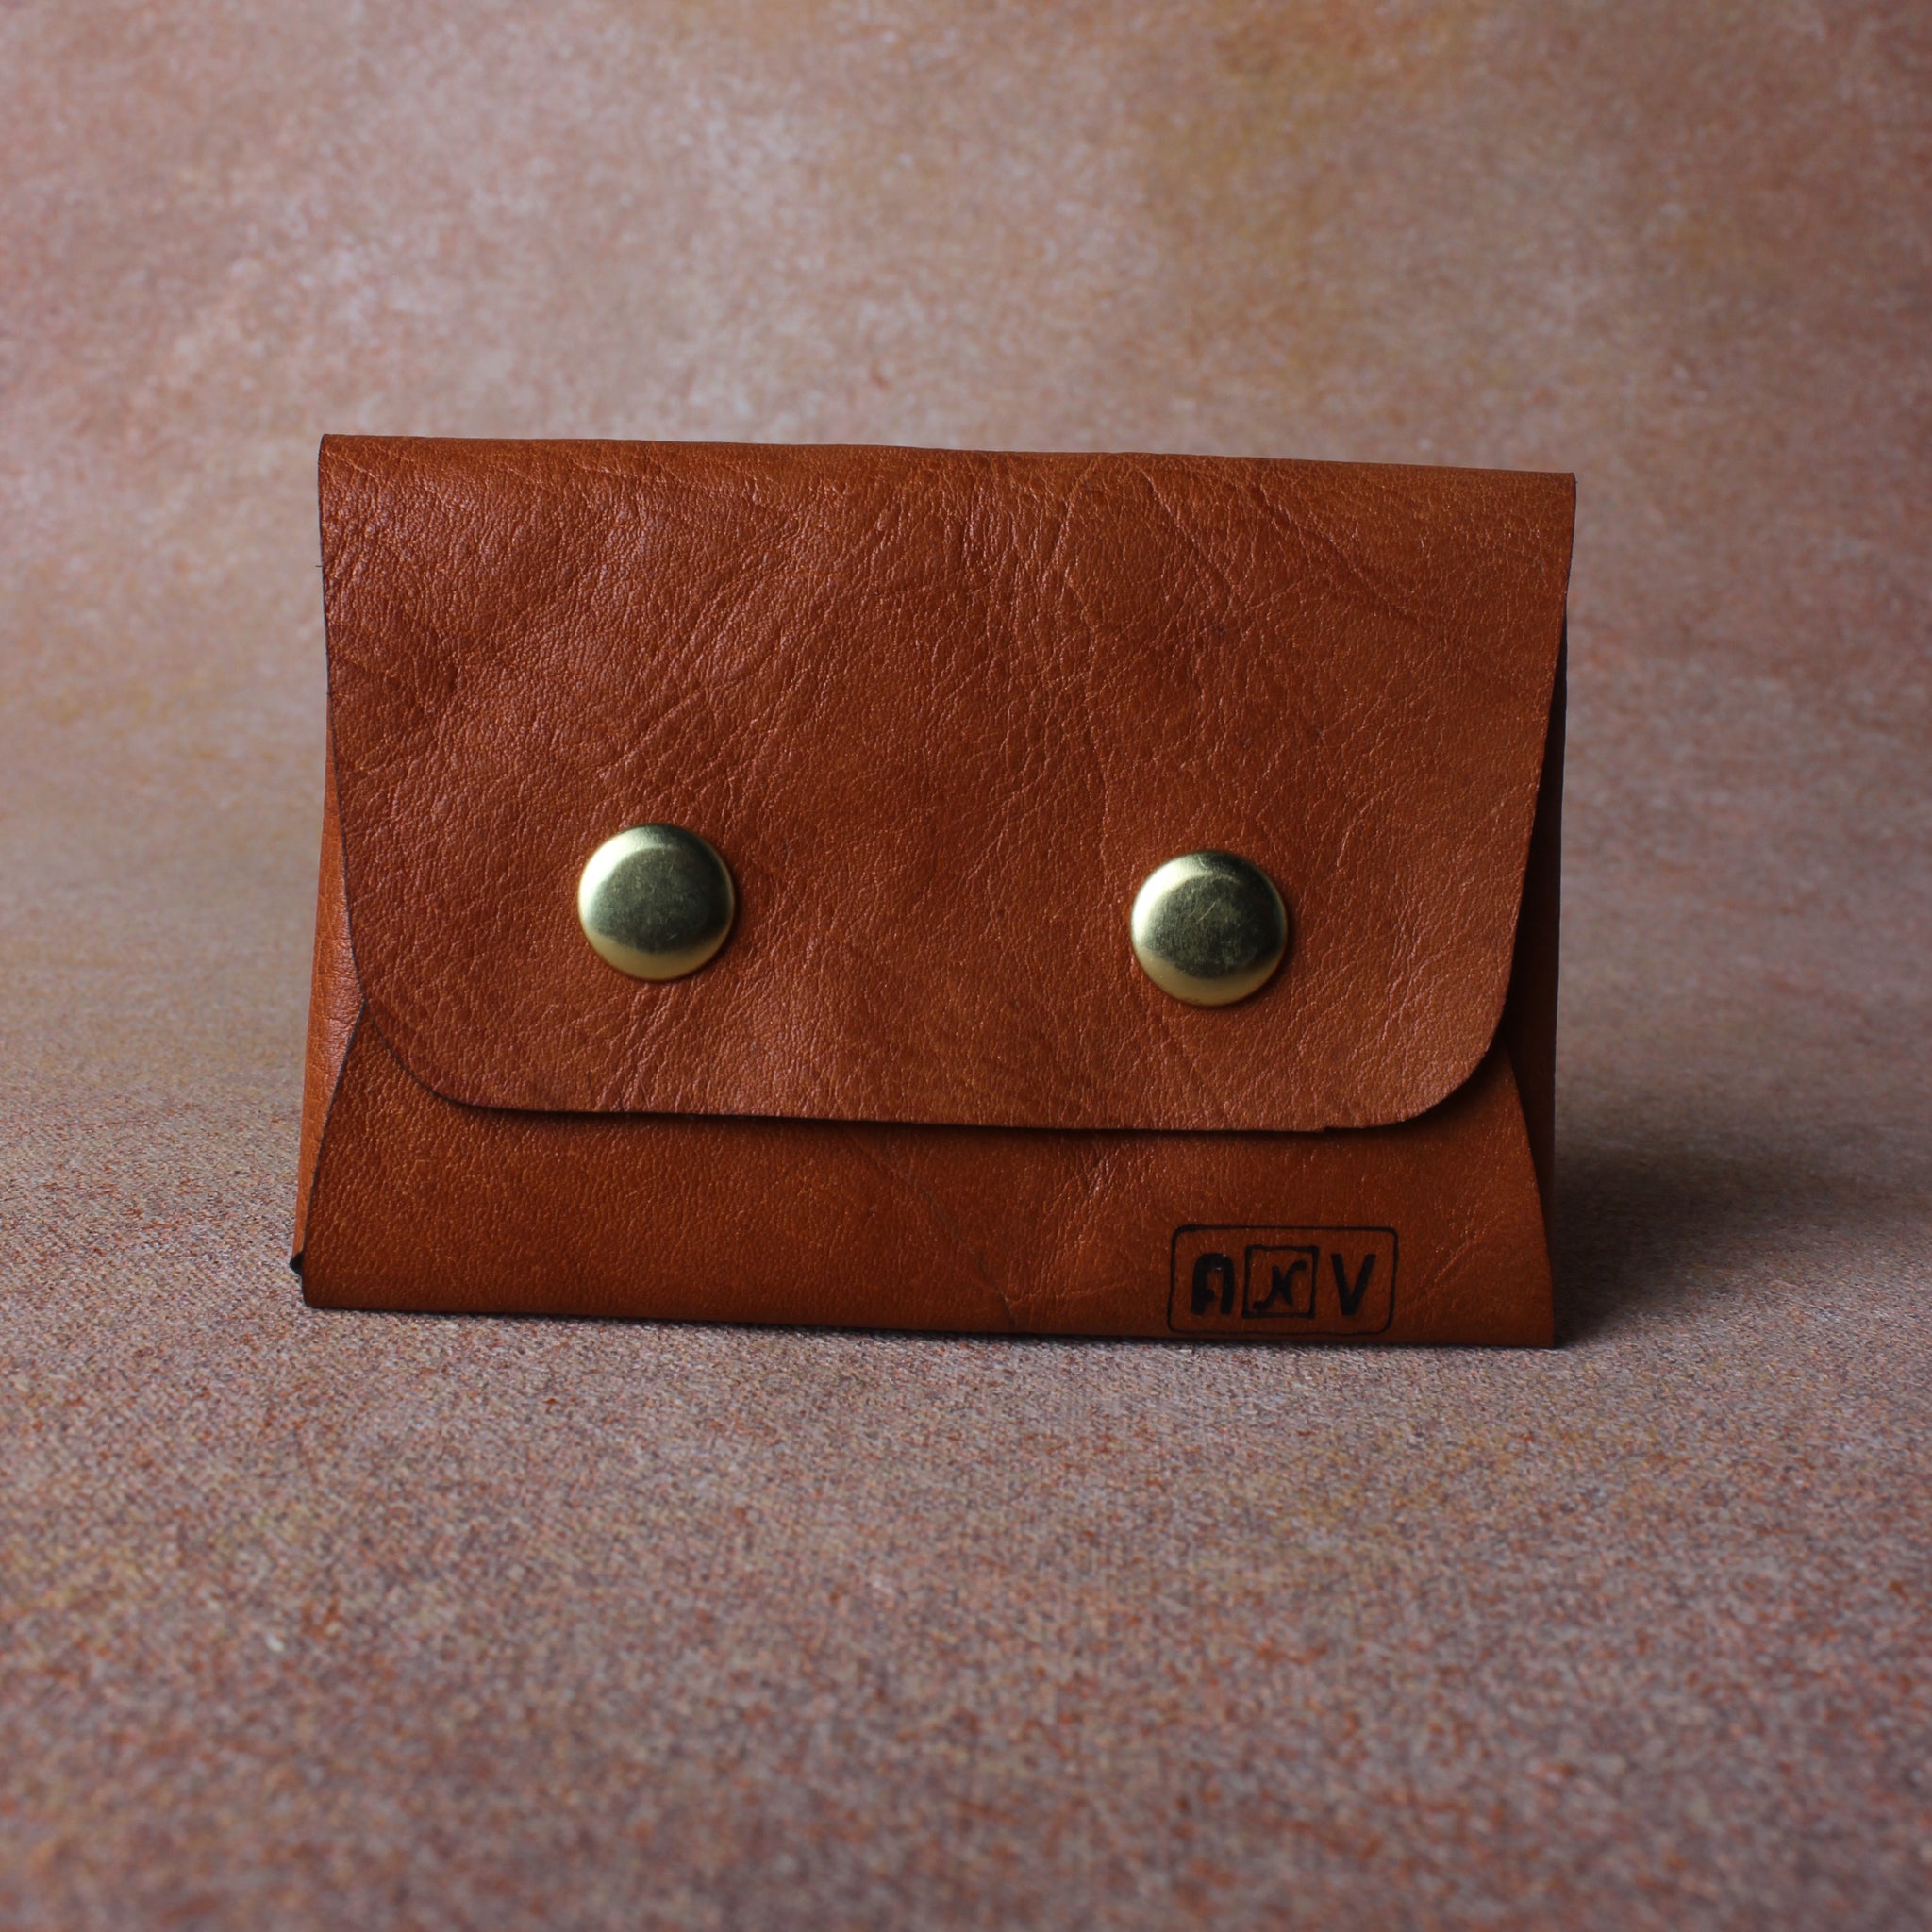 Timeless Appeal: Leather Card Pouch with Sutle Plane Texture